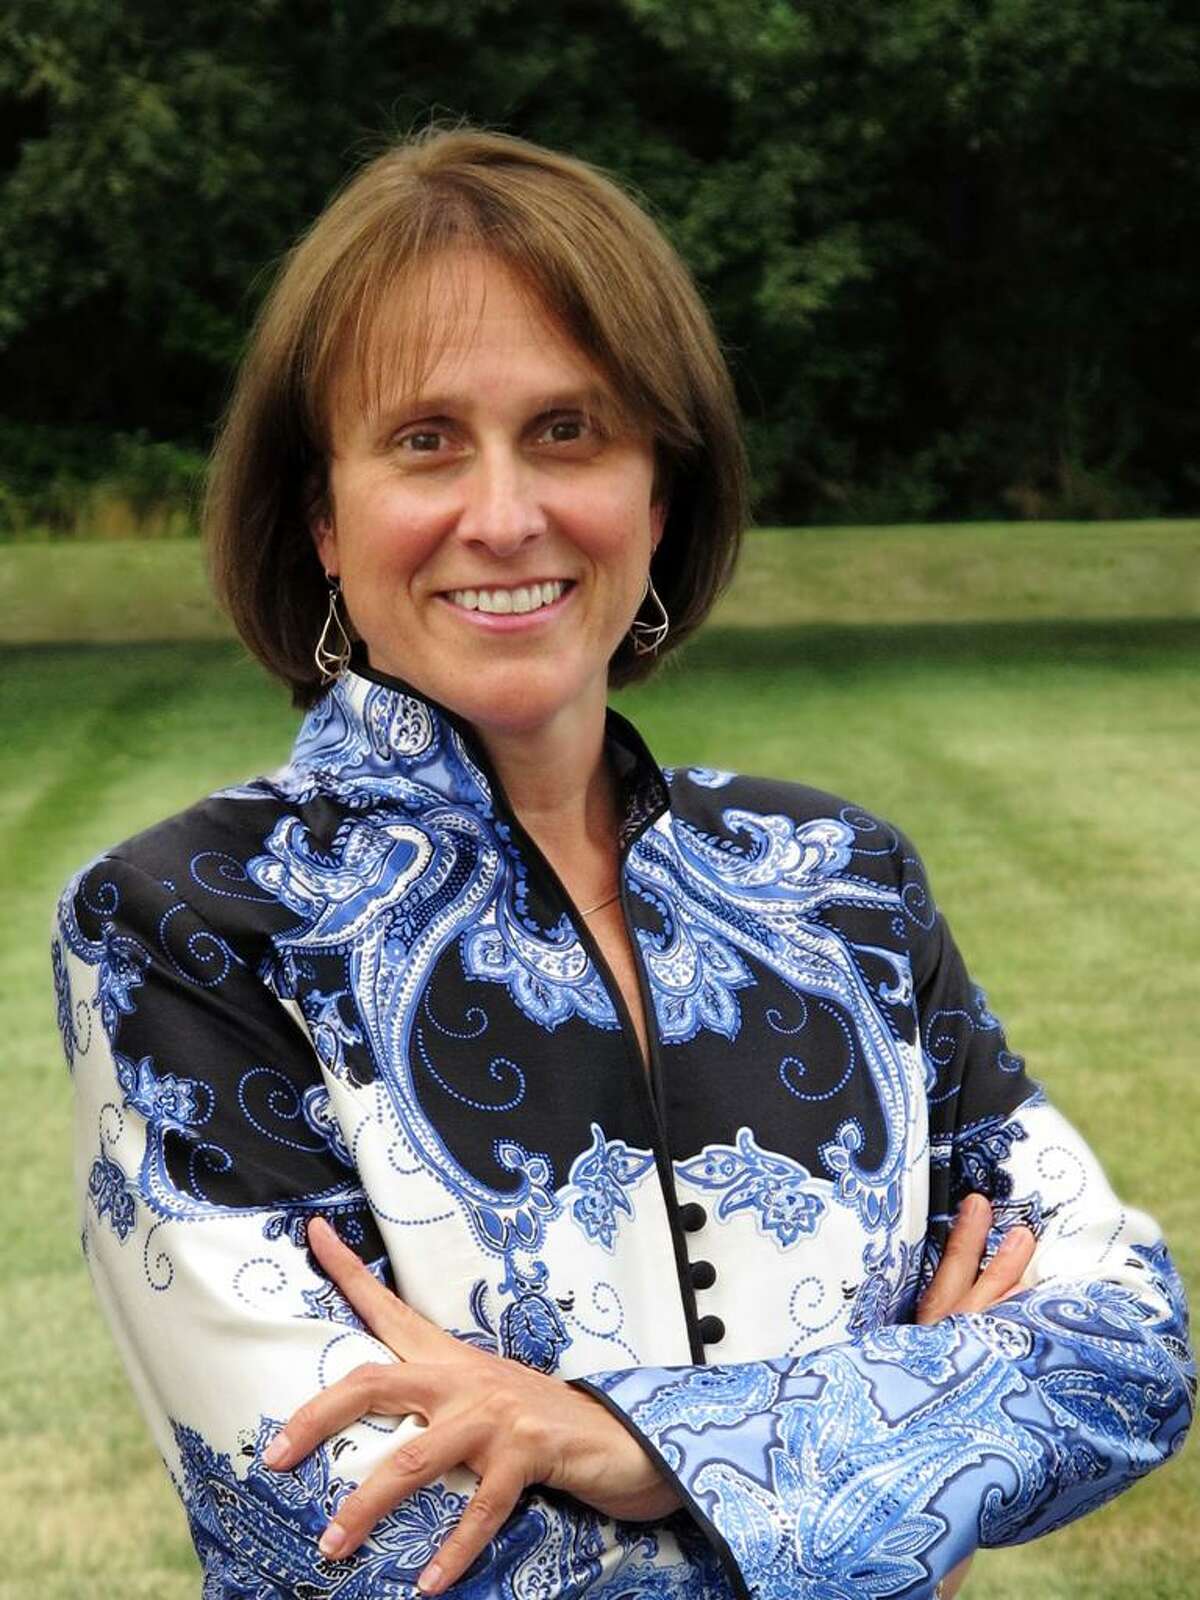 Anne M. Noble, former president of the Connecticut Lottery Corp., filed a claim for $4.2 million in damages against gambling contractor Scientific Games, over the hacking scandal that resulted in the termination of its instant “5 Card Cash” game. The claim was recently settled for $300,000.